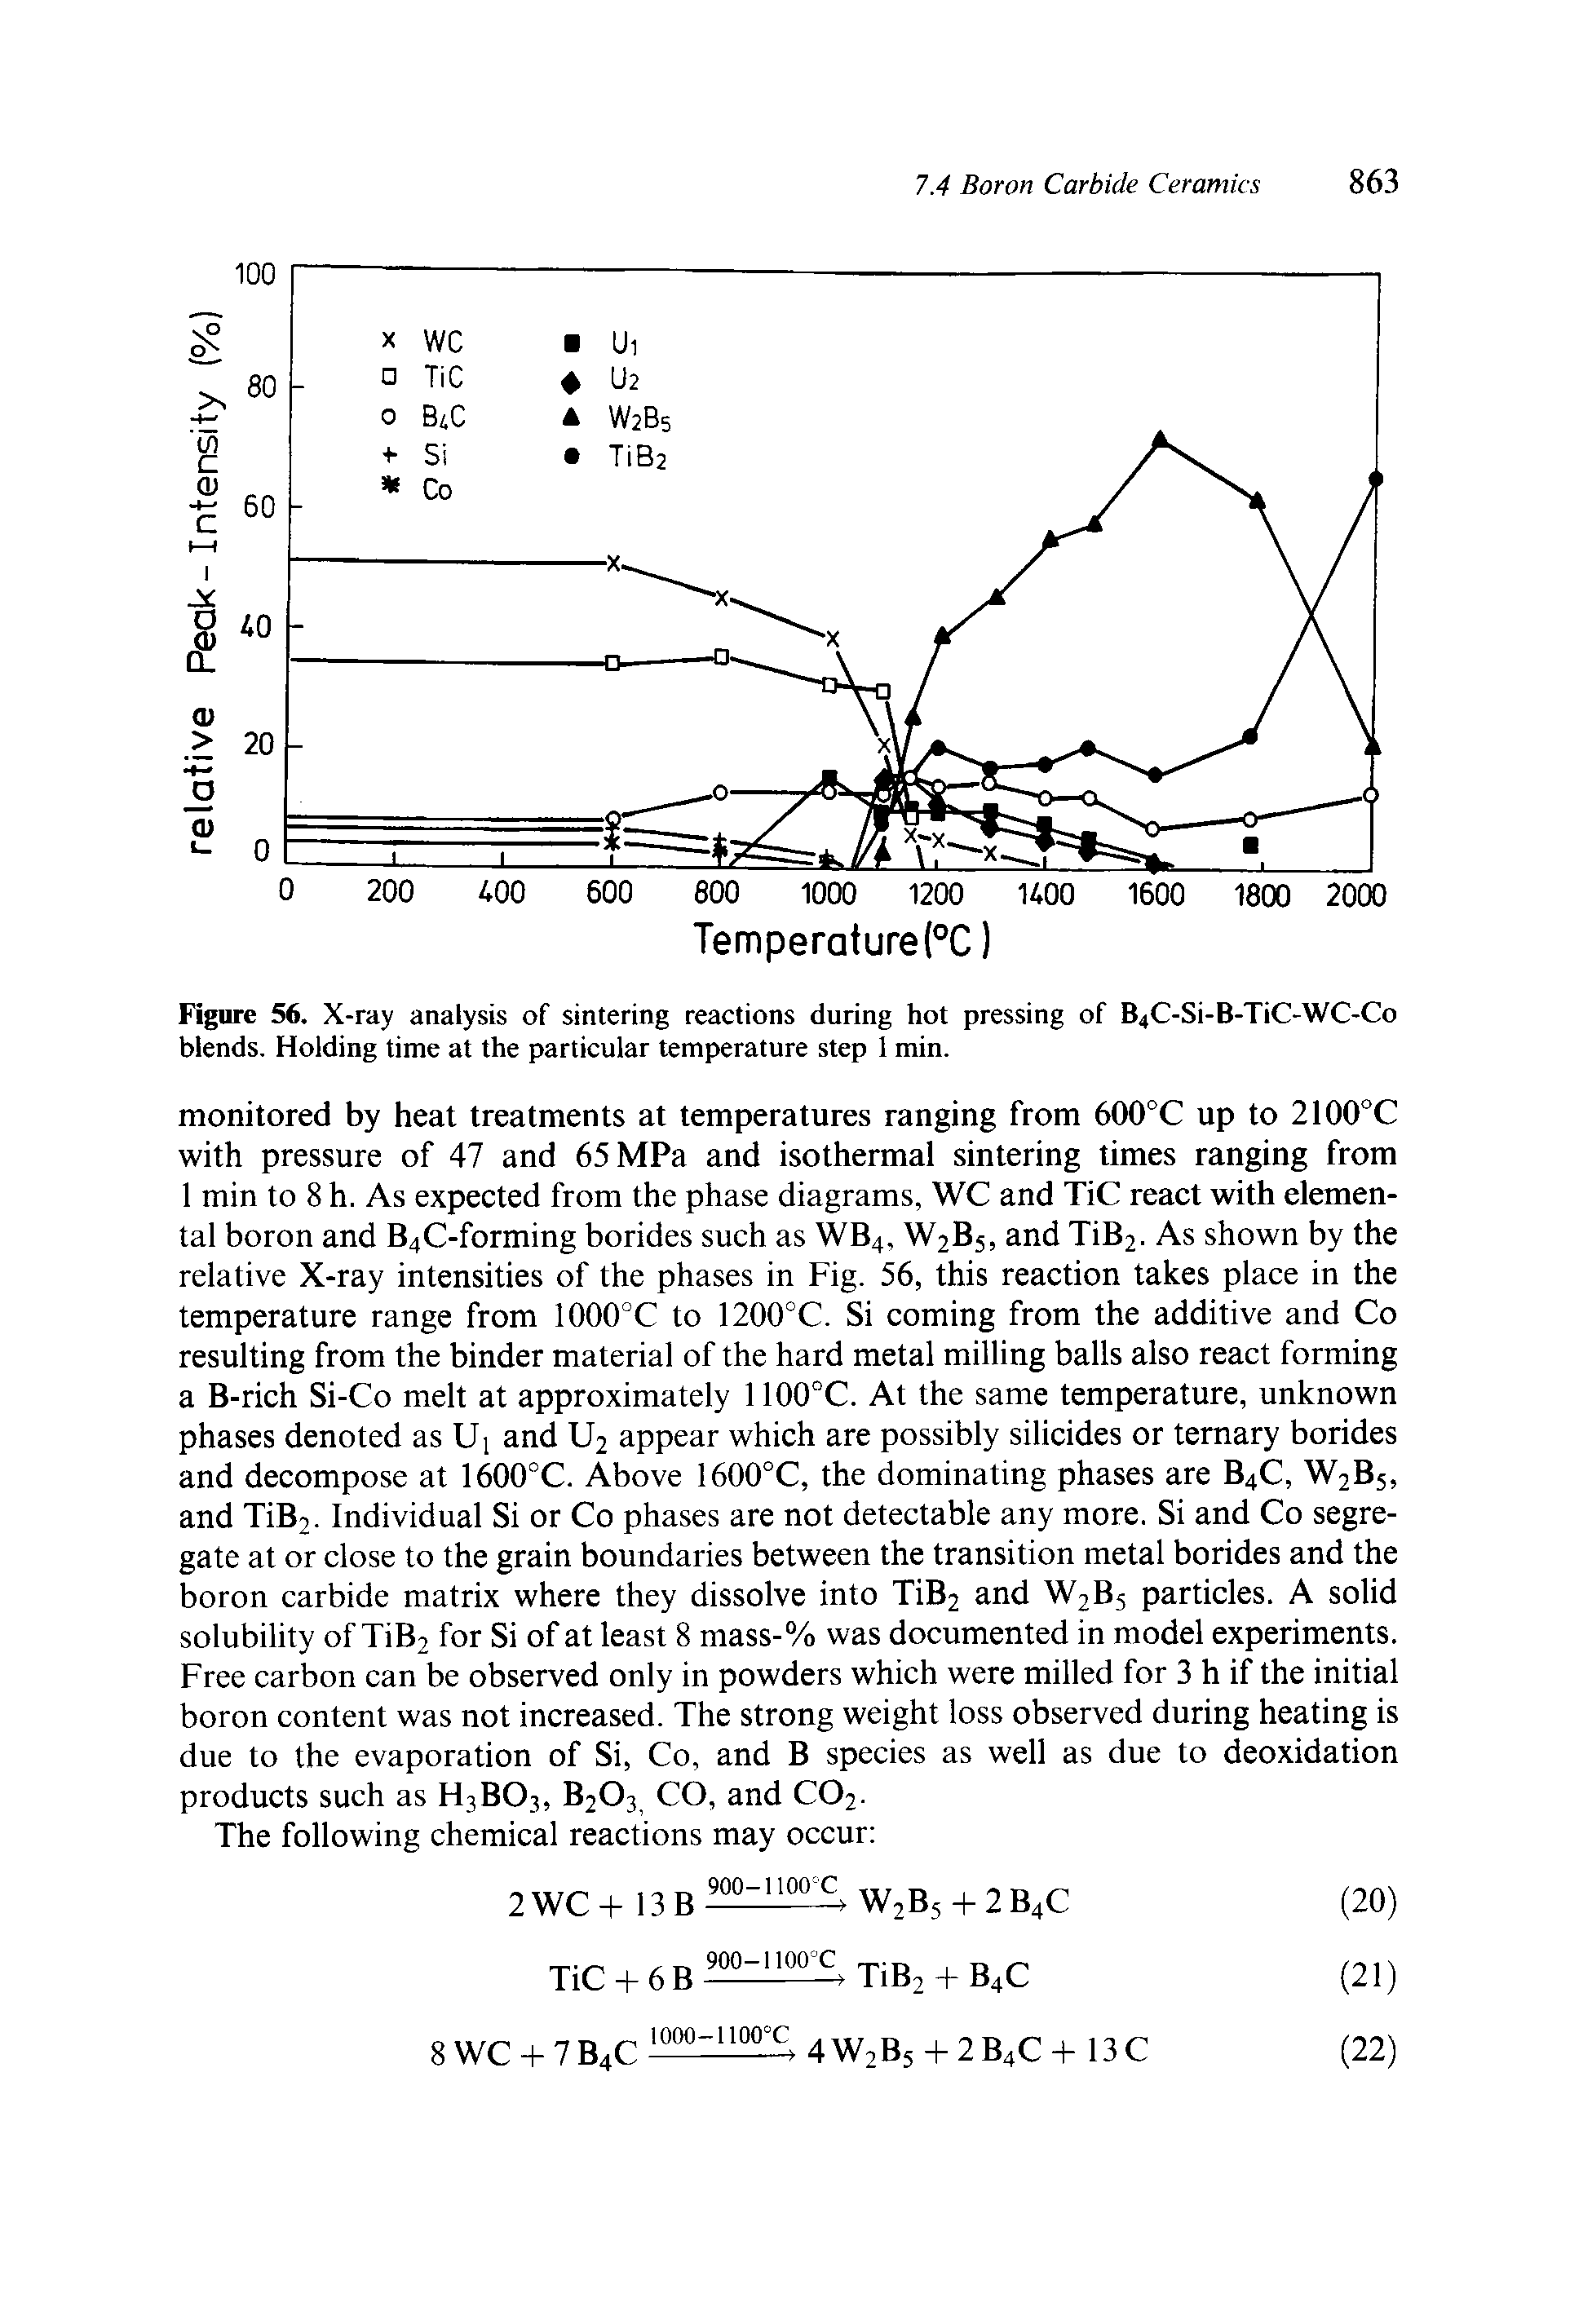 Figure 56. X-ray analysis of sintering reactions during hot pressing of B4C-Si-B-TiC-WC-Co blends. Holding time at the particular temperature step 1 min.